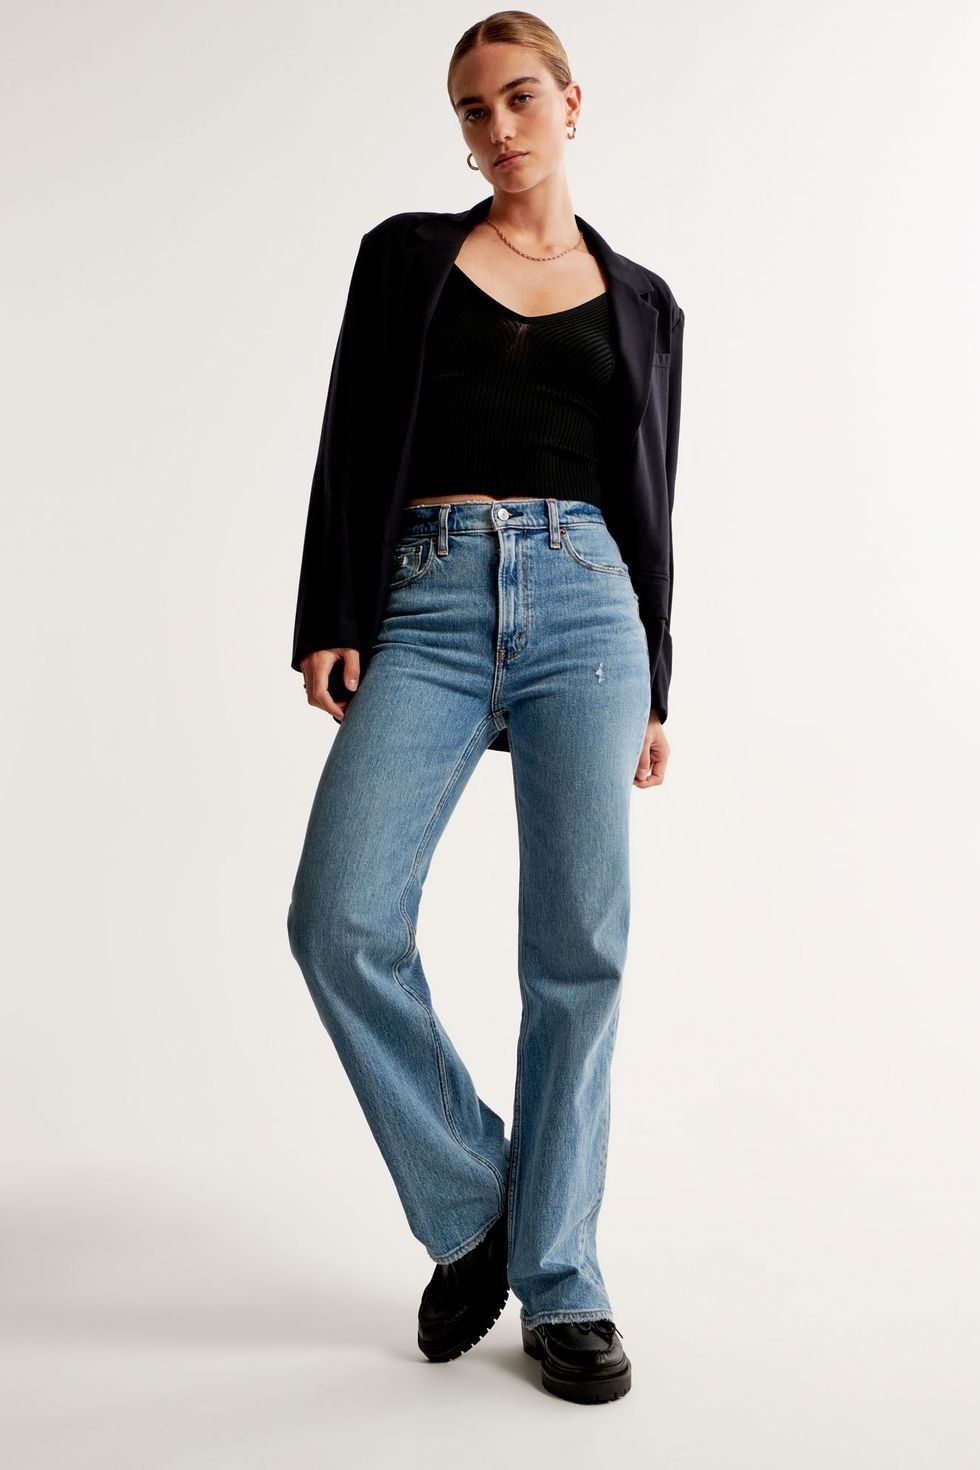 18 Best Jeans for Women 2020 - Best Fitting Jeans by Style and